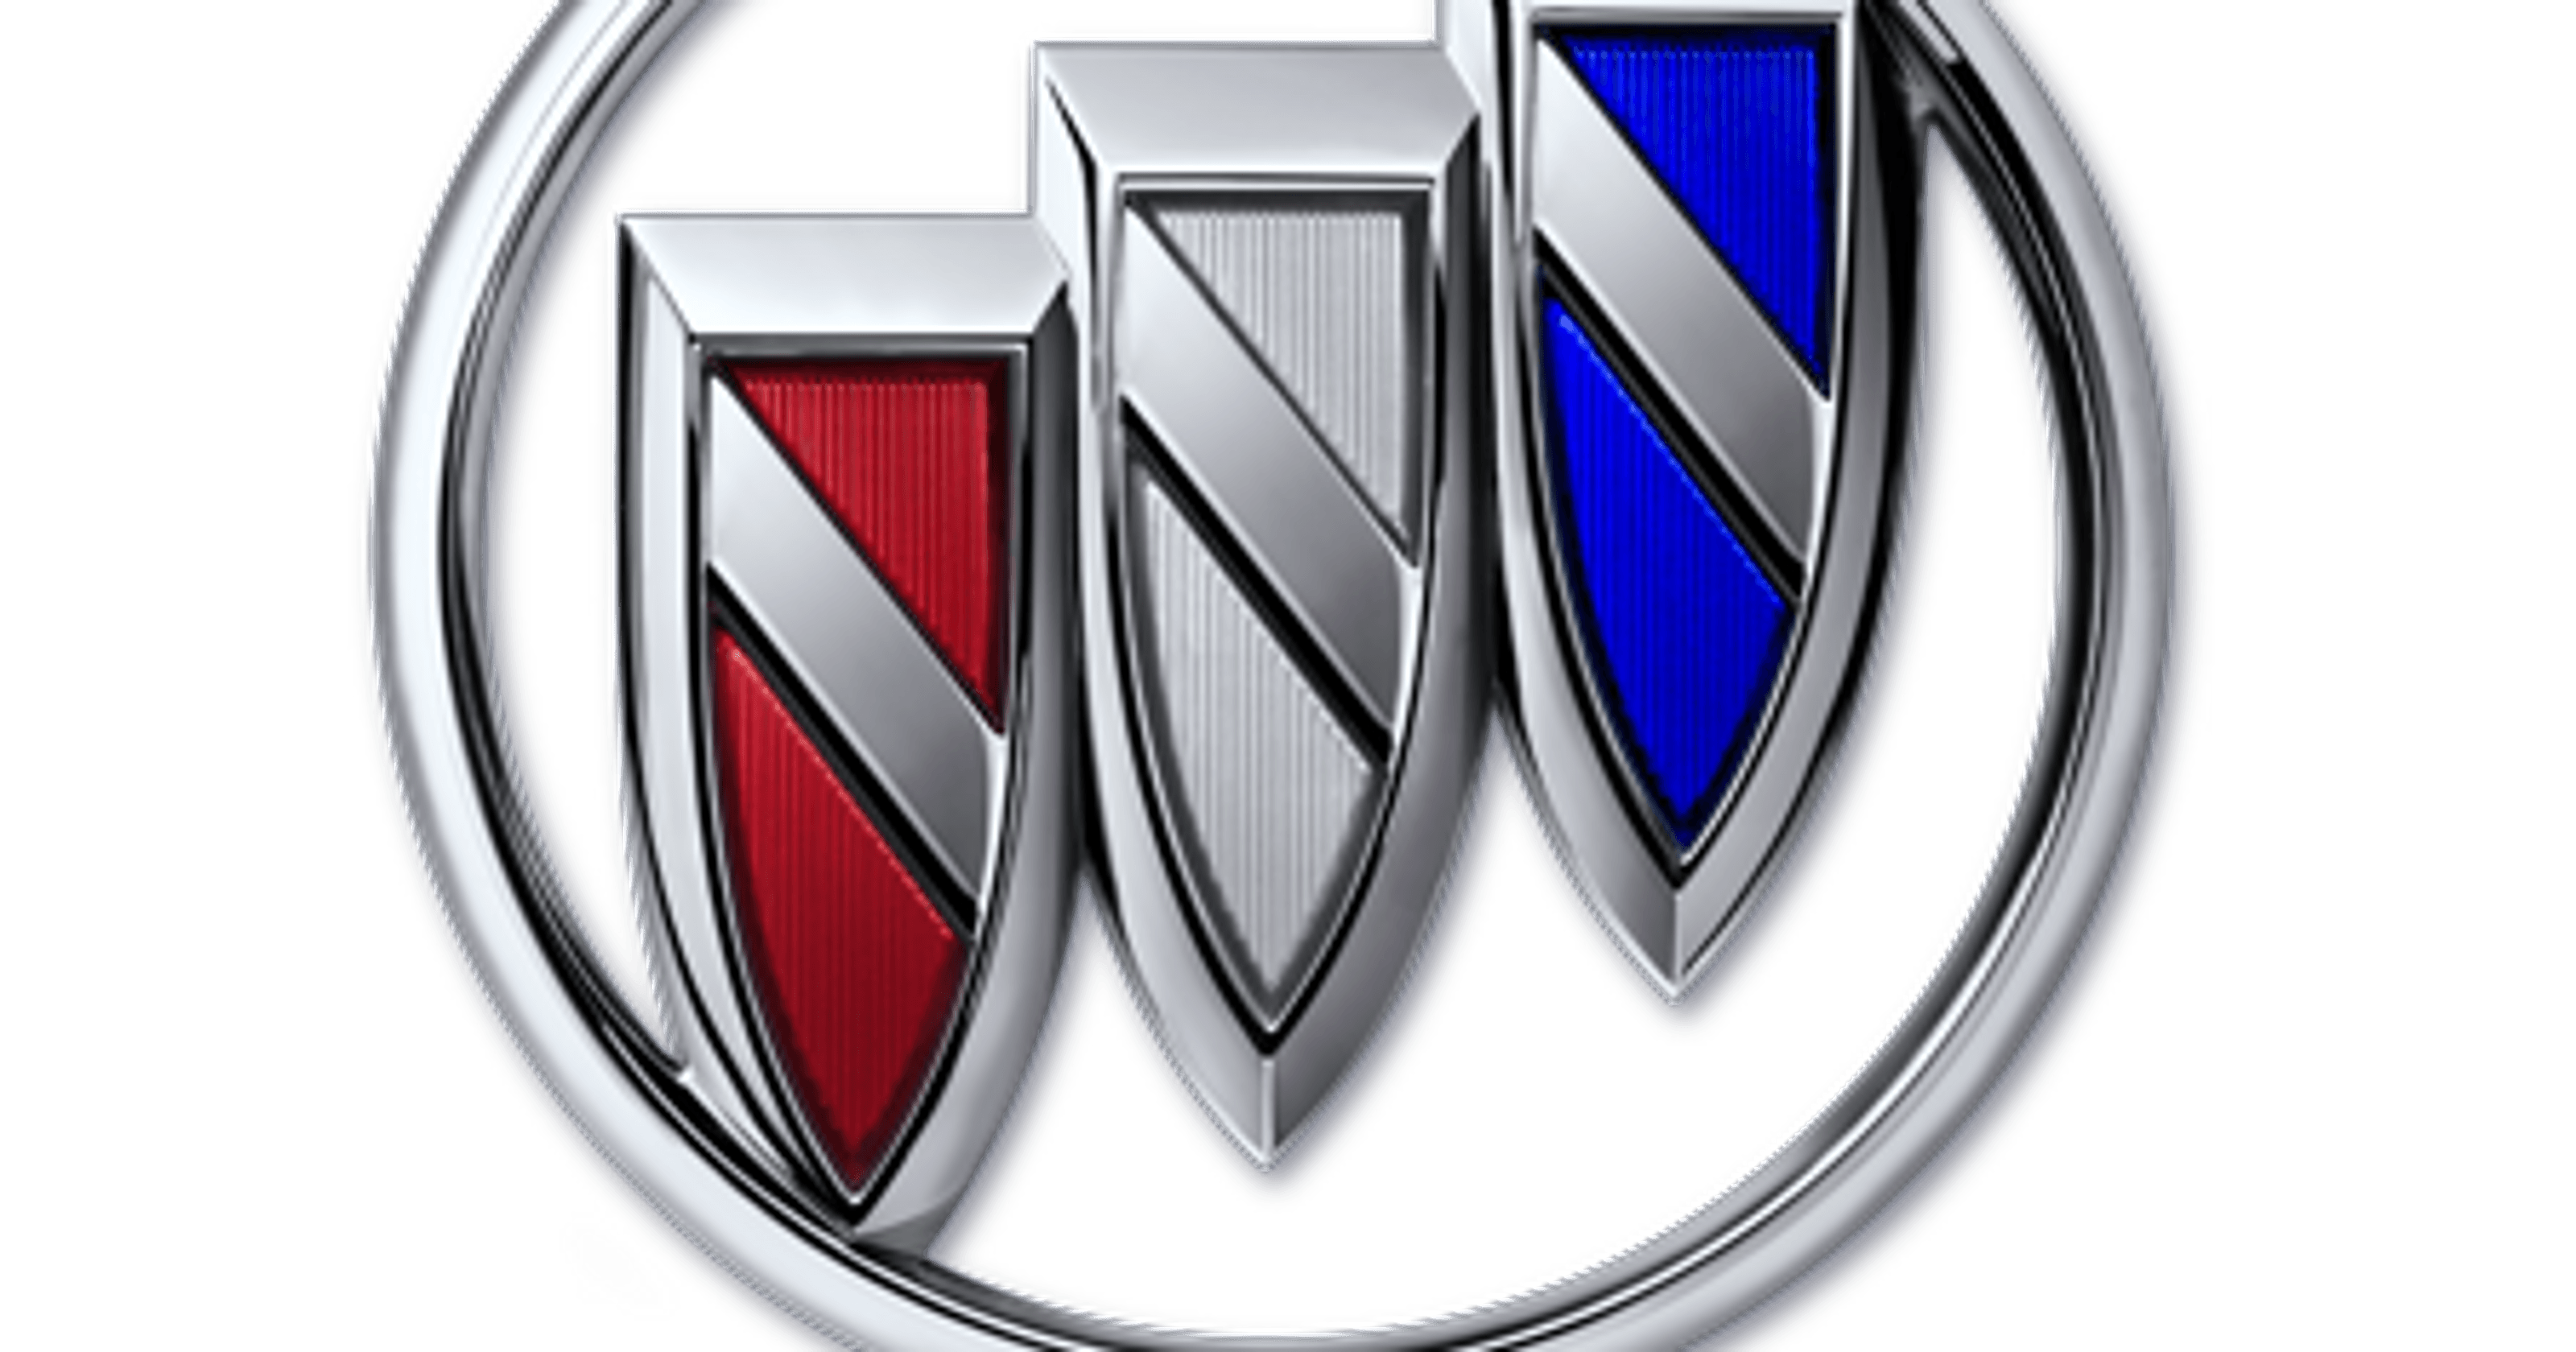 Buick Division Logo - Buick offers free Wi-Fi to drivers during March Madness